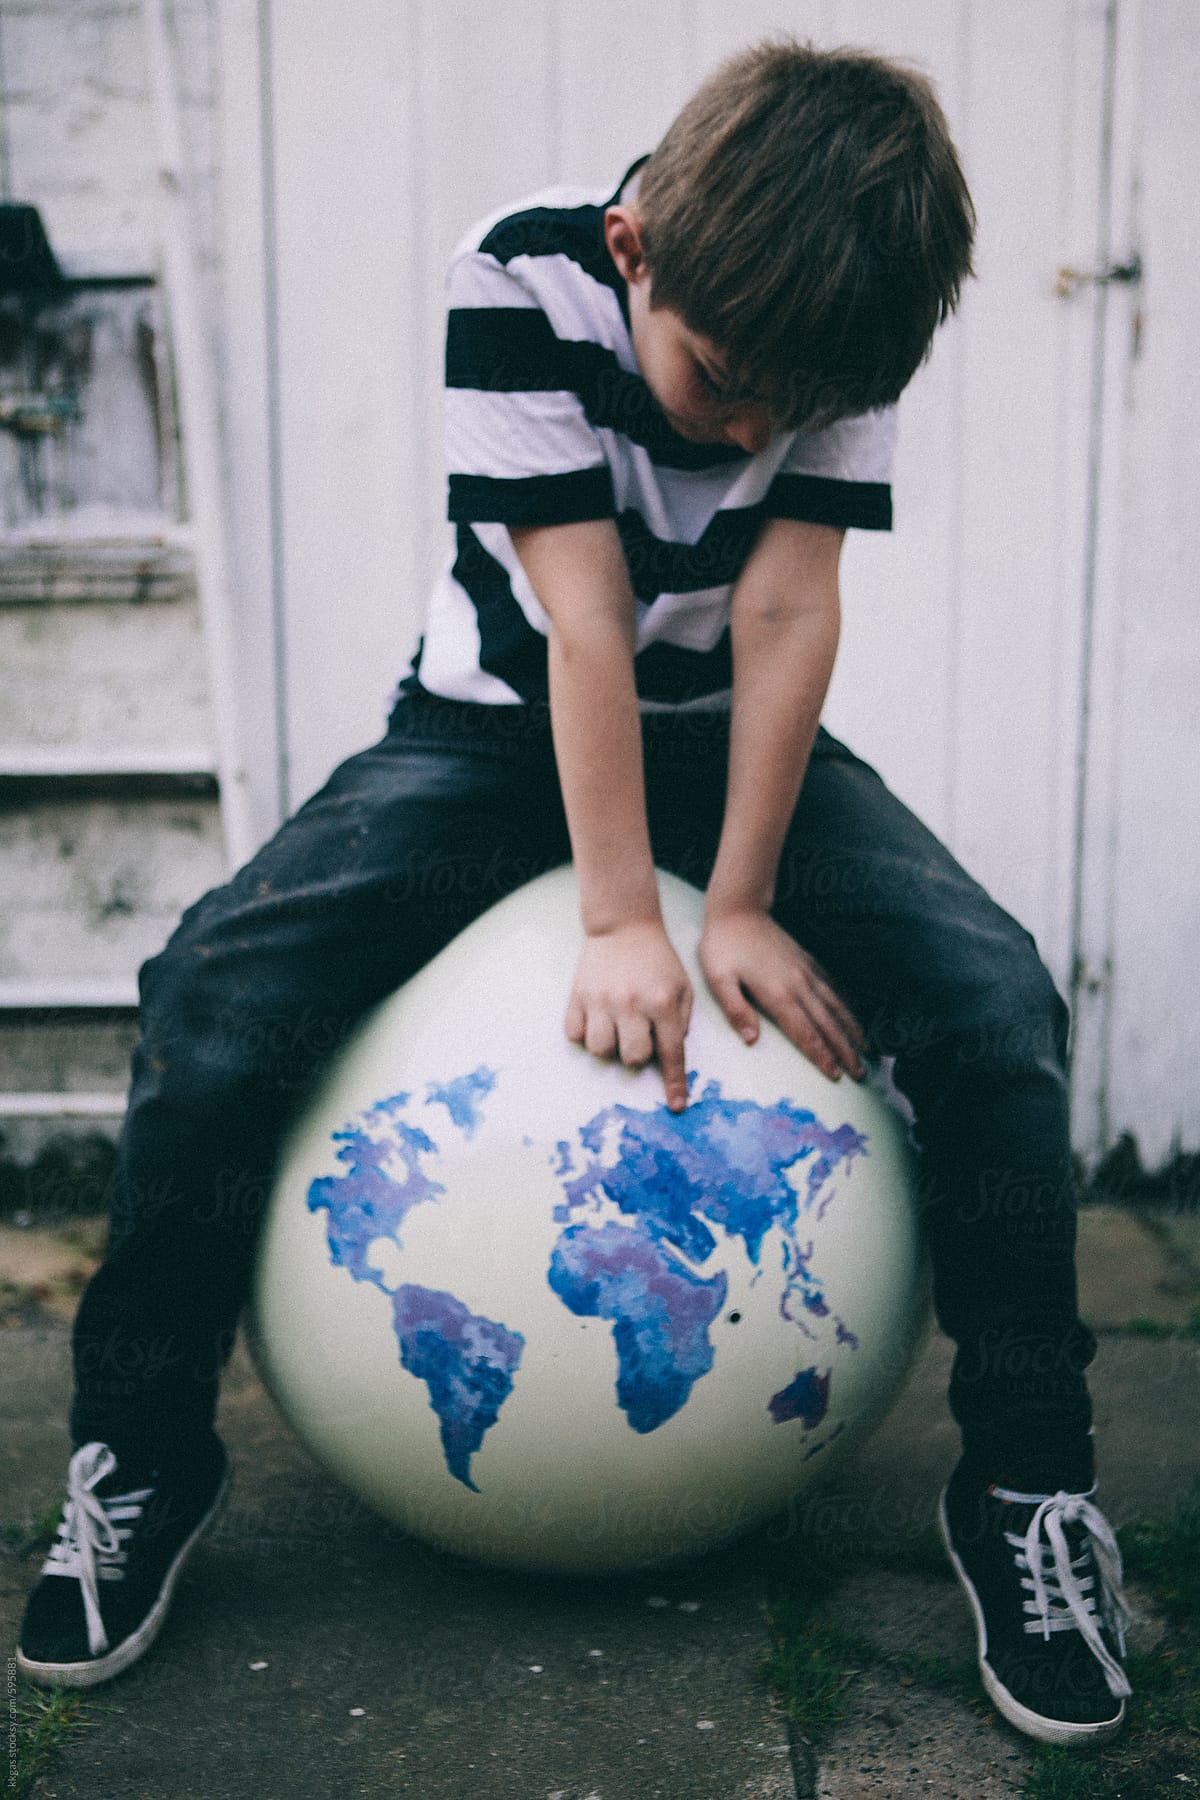 Young boy sitting on an oversized globe.